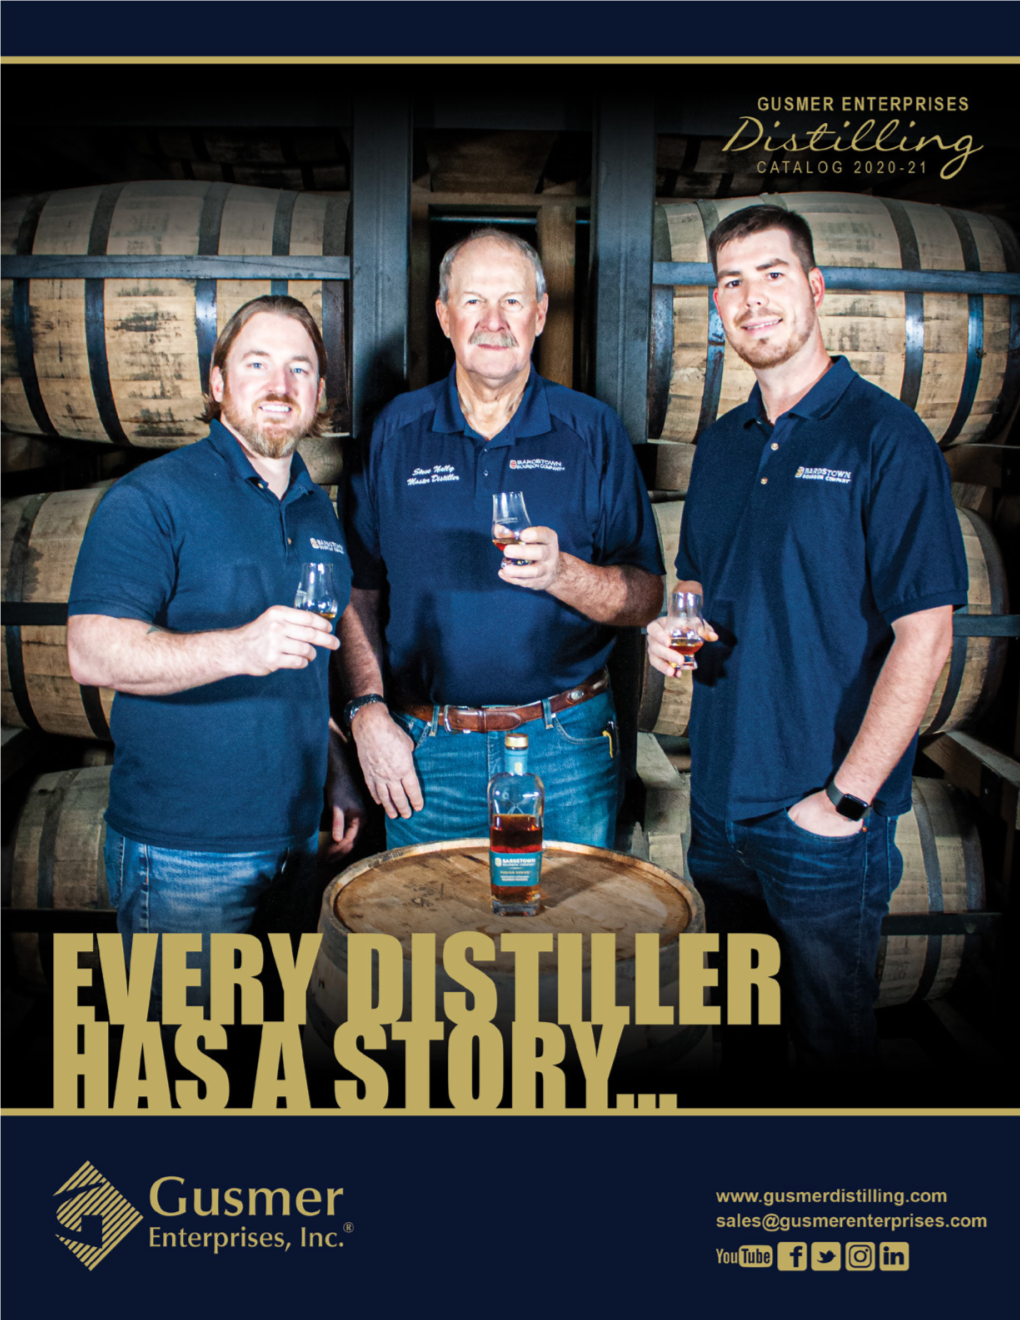 Every Distiller Has a Story... Welcome